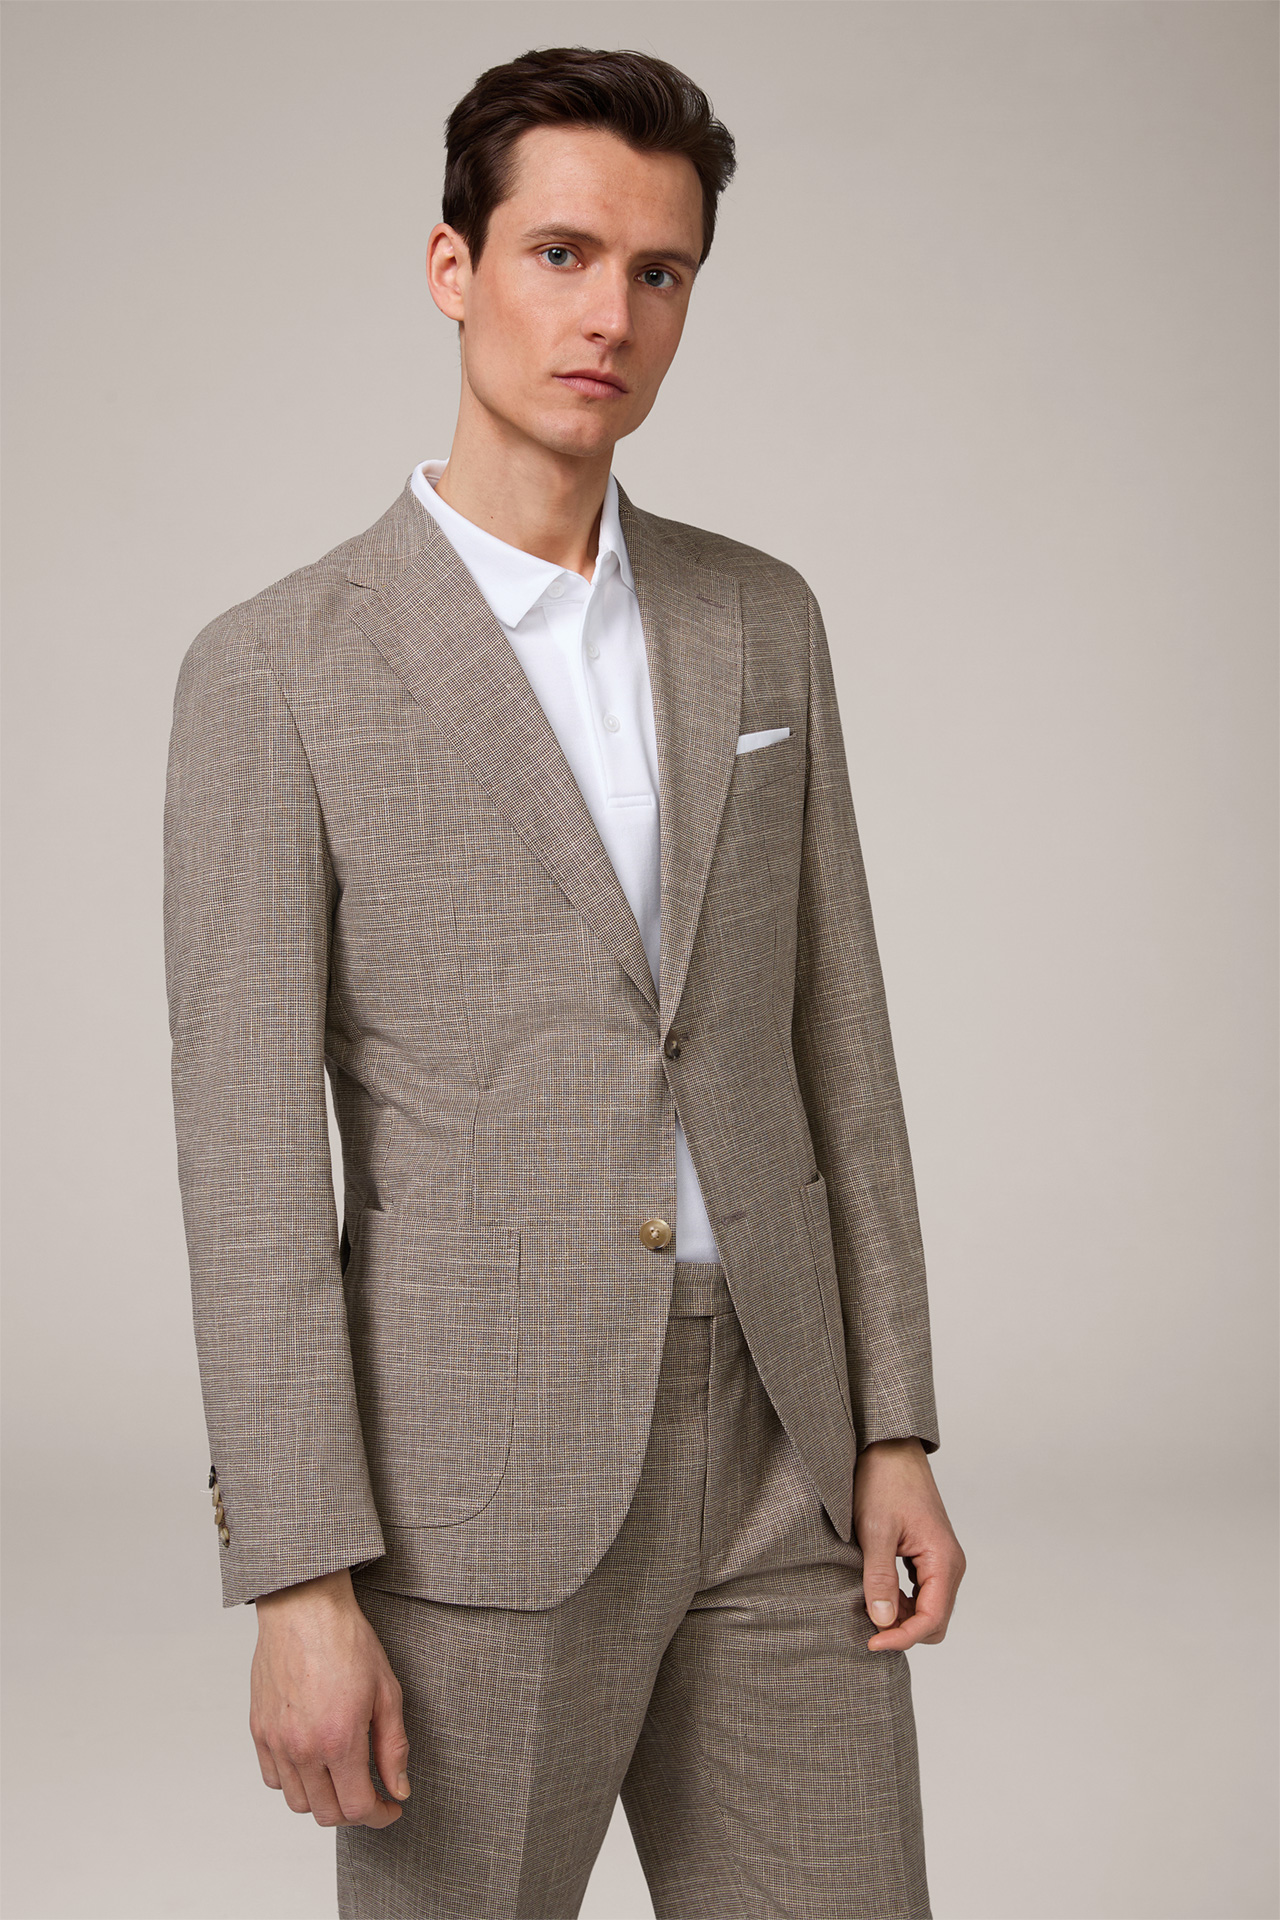 Giro Modular Cotton Blend Jacket with Wool and Linen in a Brown and Beige Pattern